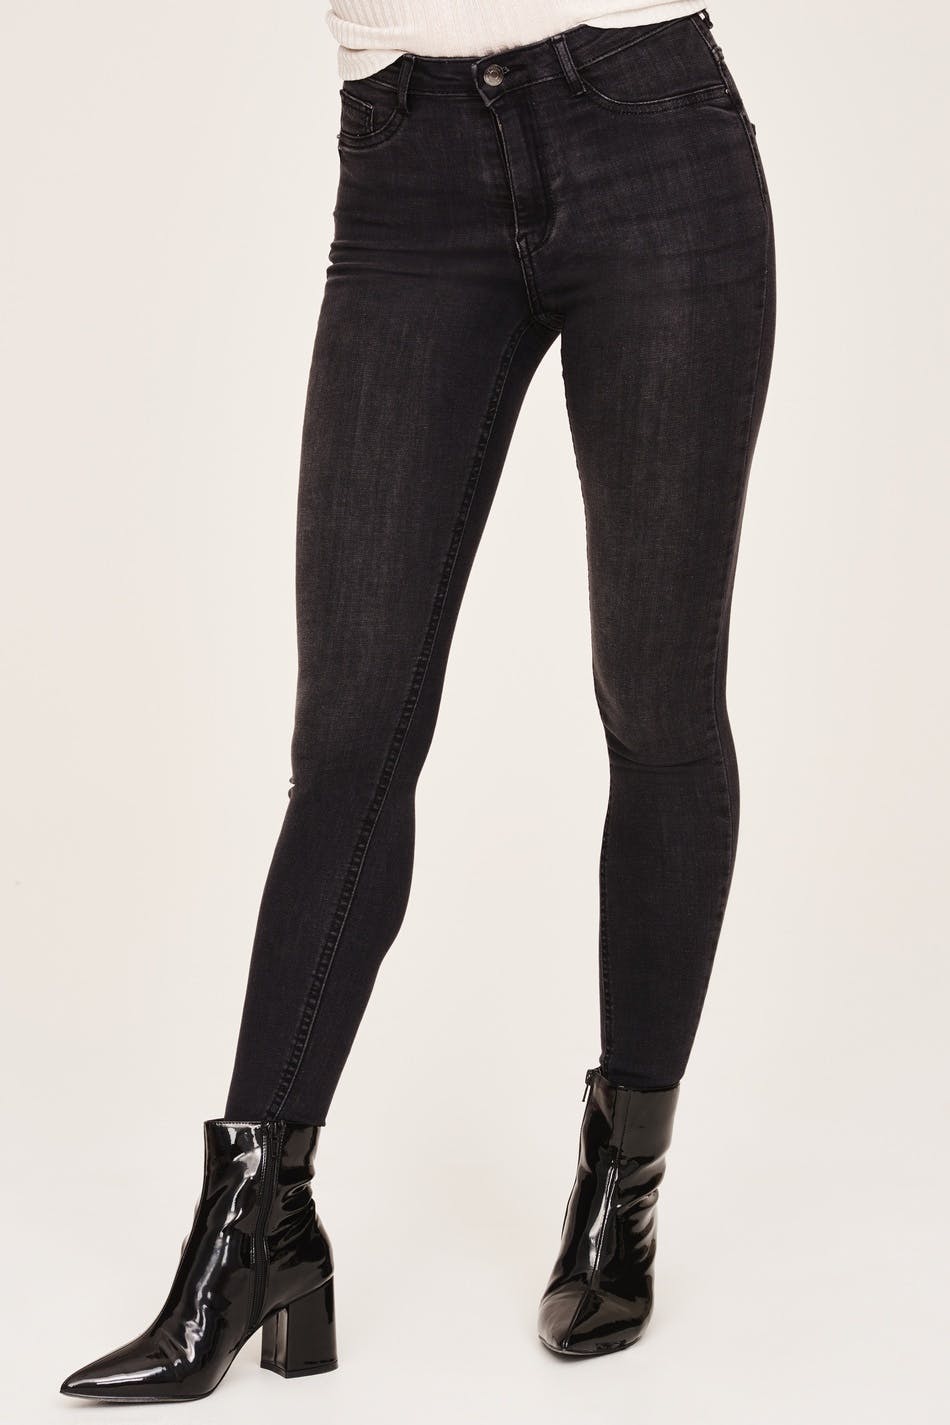 Molly waist jeans - subskinny - Gina Tricot